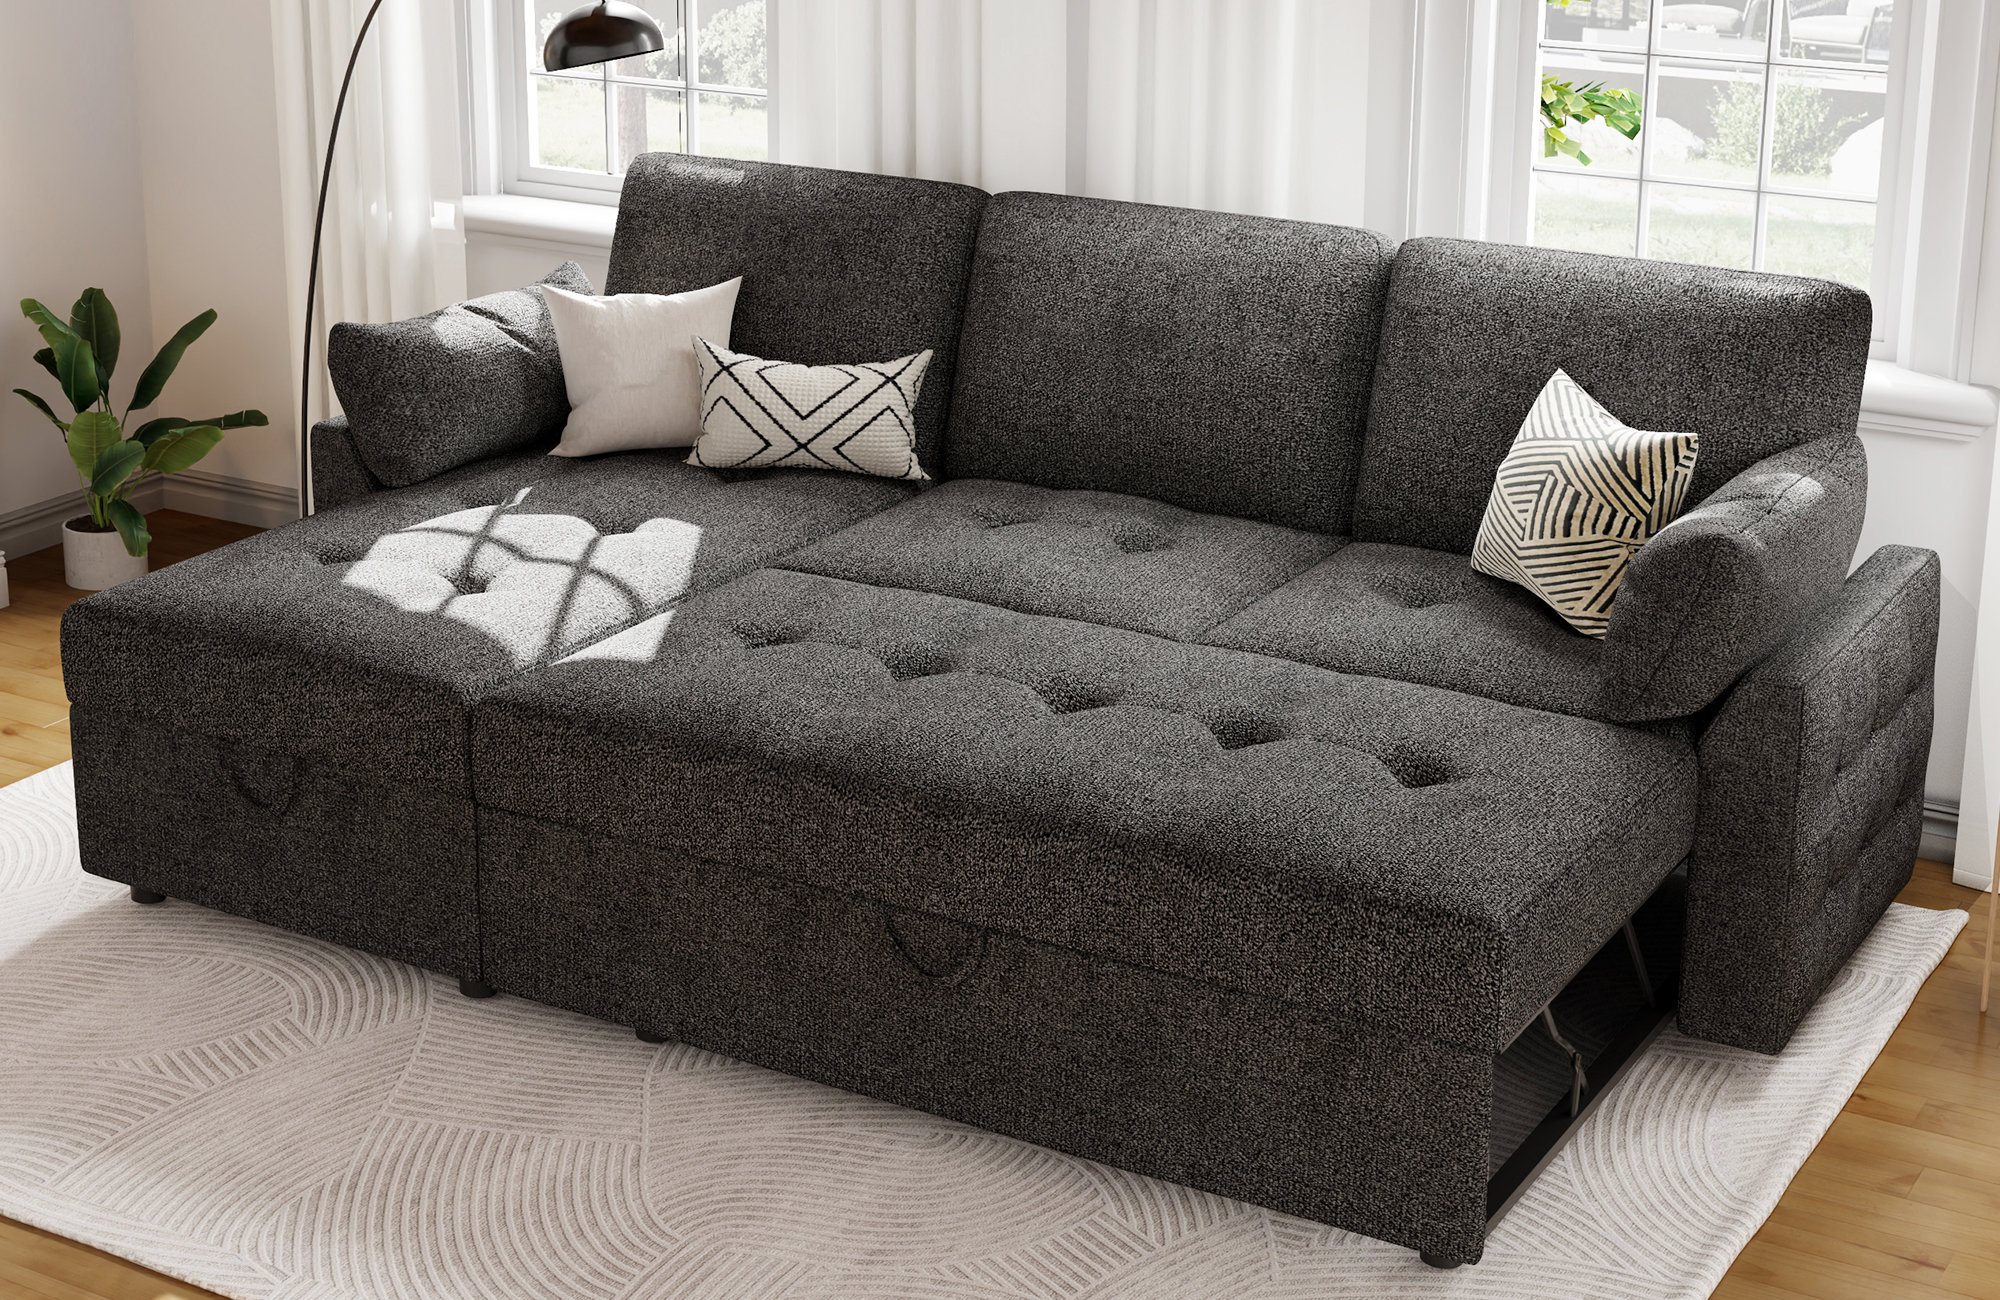 Loveseat Sofa with Throw Pillows, Modern Tufted Upholstered 2